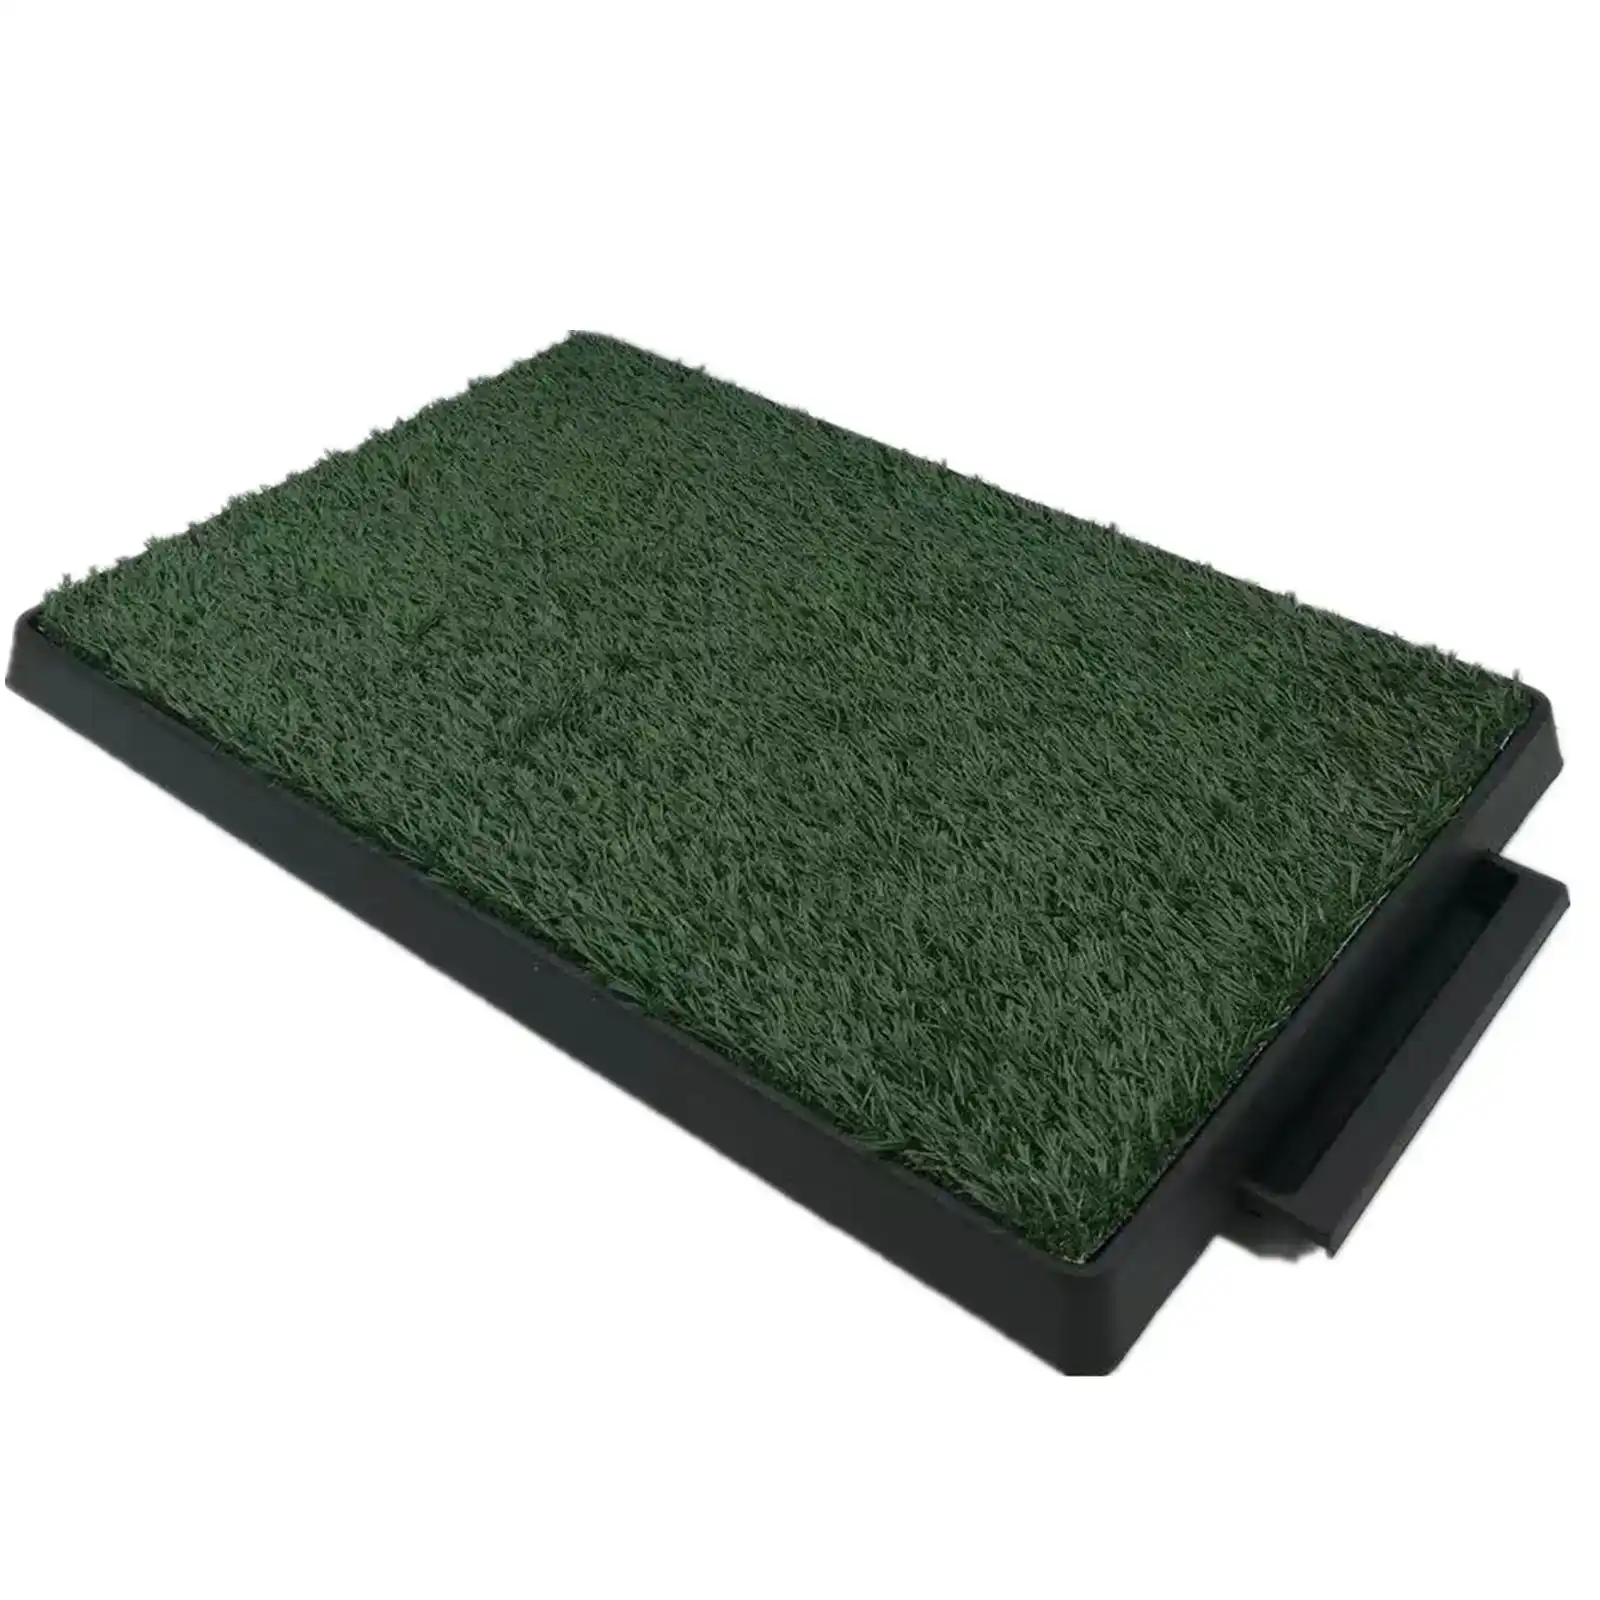 Xl Indoor Dog Puppy Toilet Grass Potty Training Mat Loo Pad With 1 - One Size